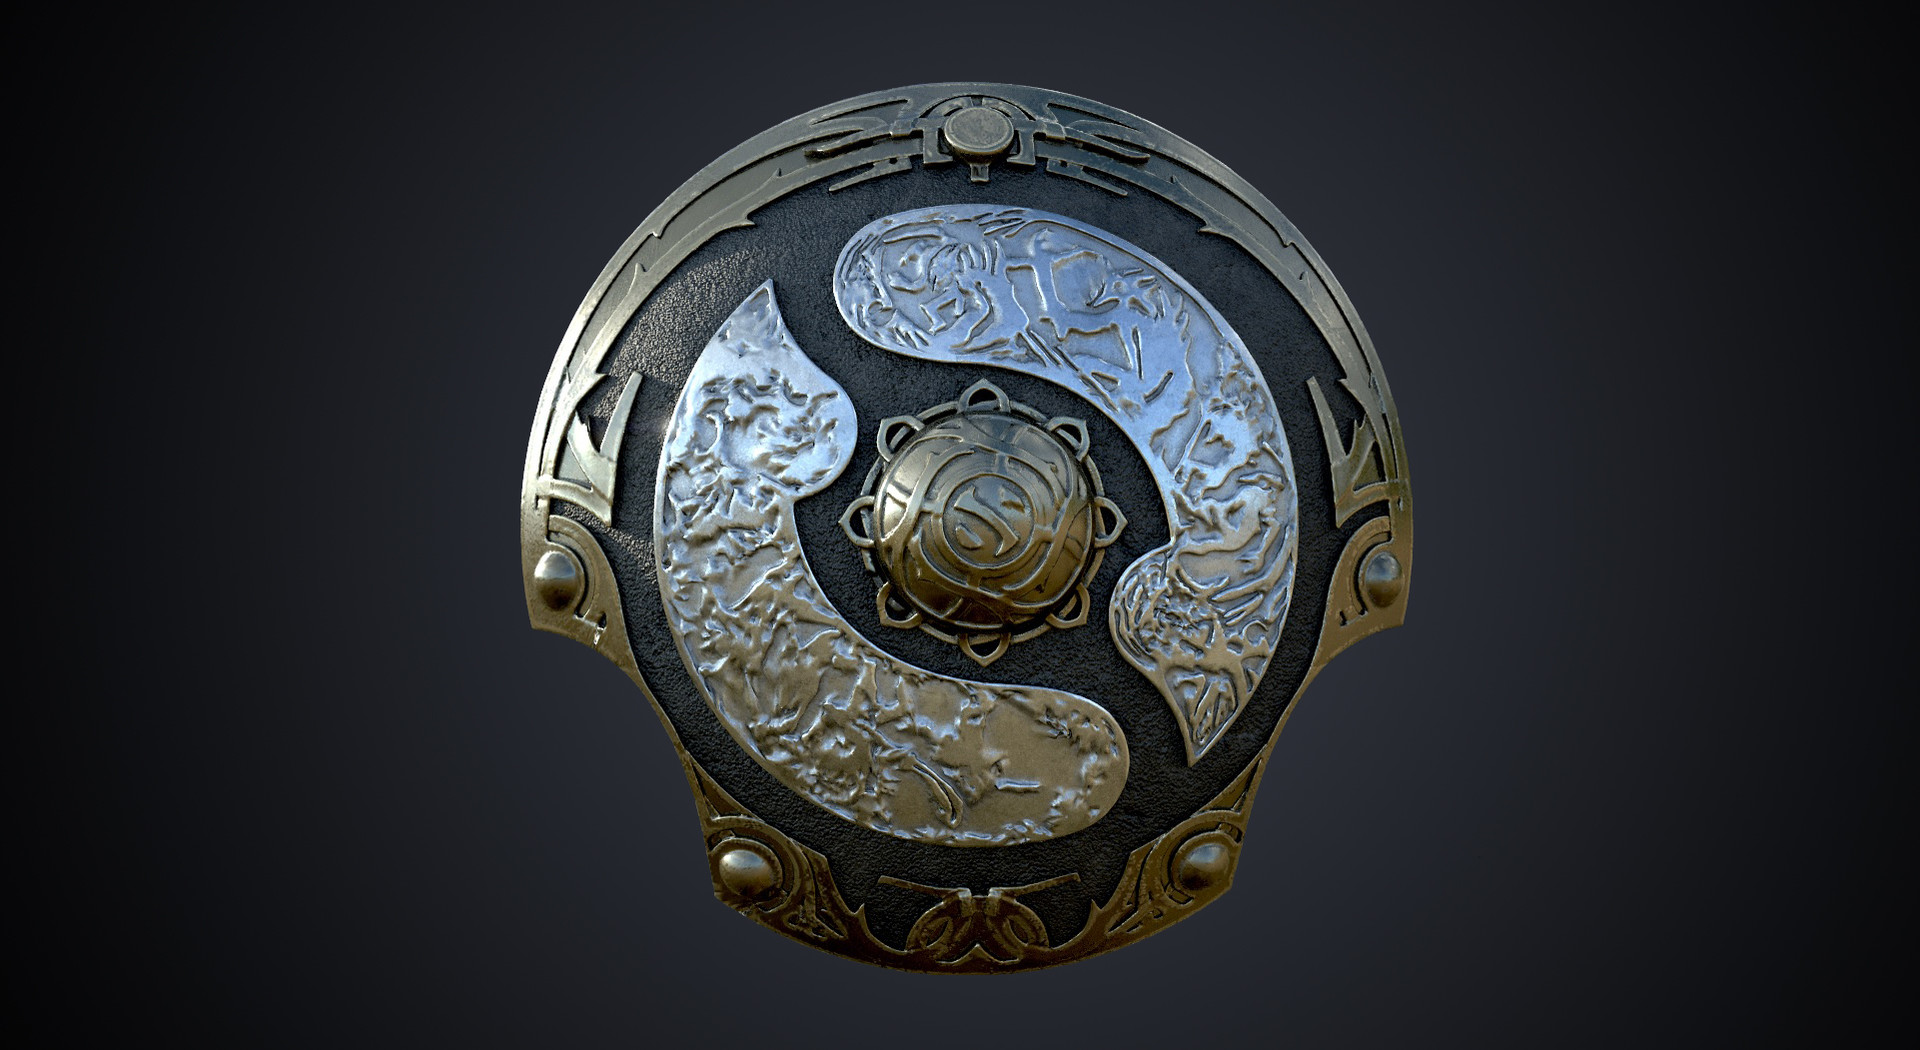 This is my new model - Aegis shield created for 3D printing as reward